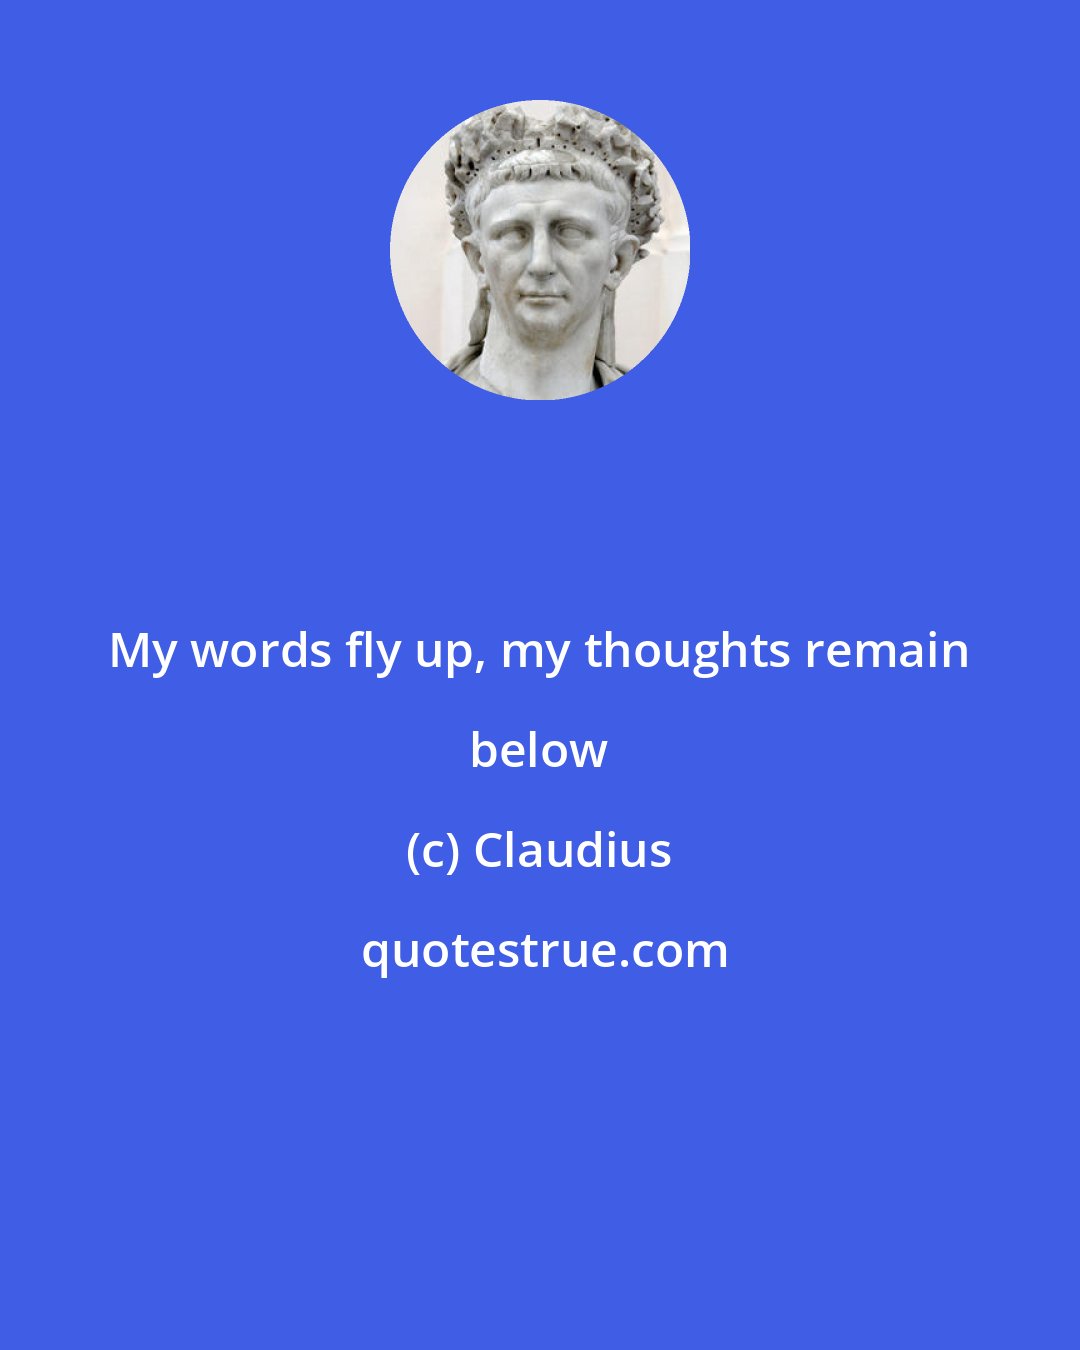 Claudius: My words fly up, my thoughts remain below